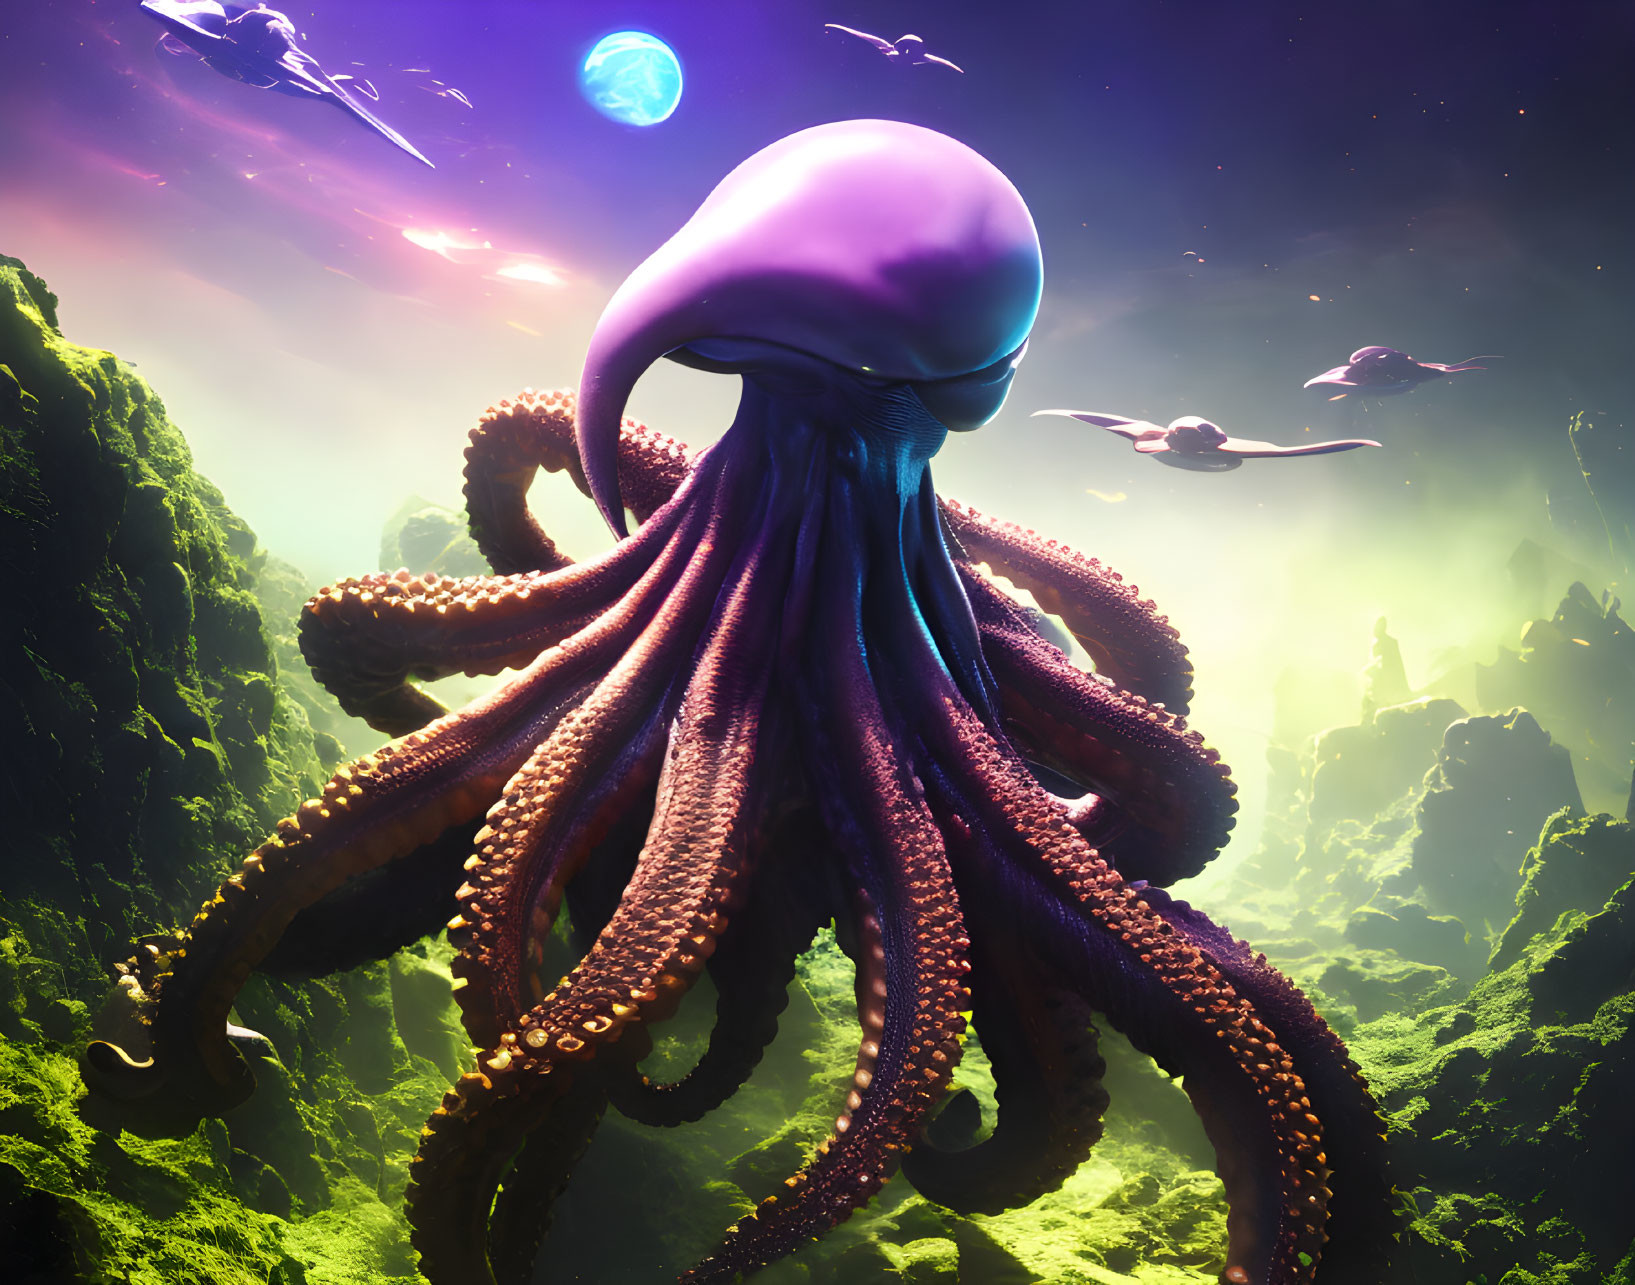 Purple jellyfish with tentacles in alien landscape with saucers & planets